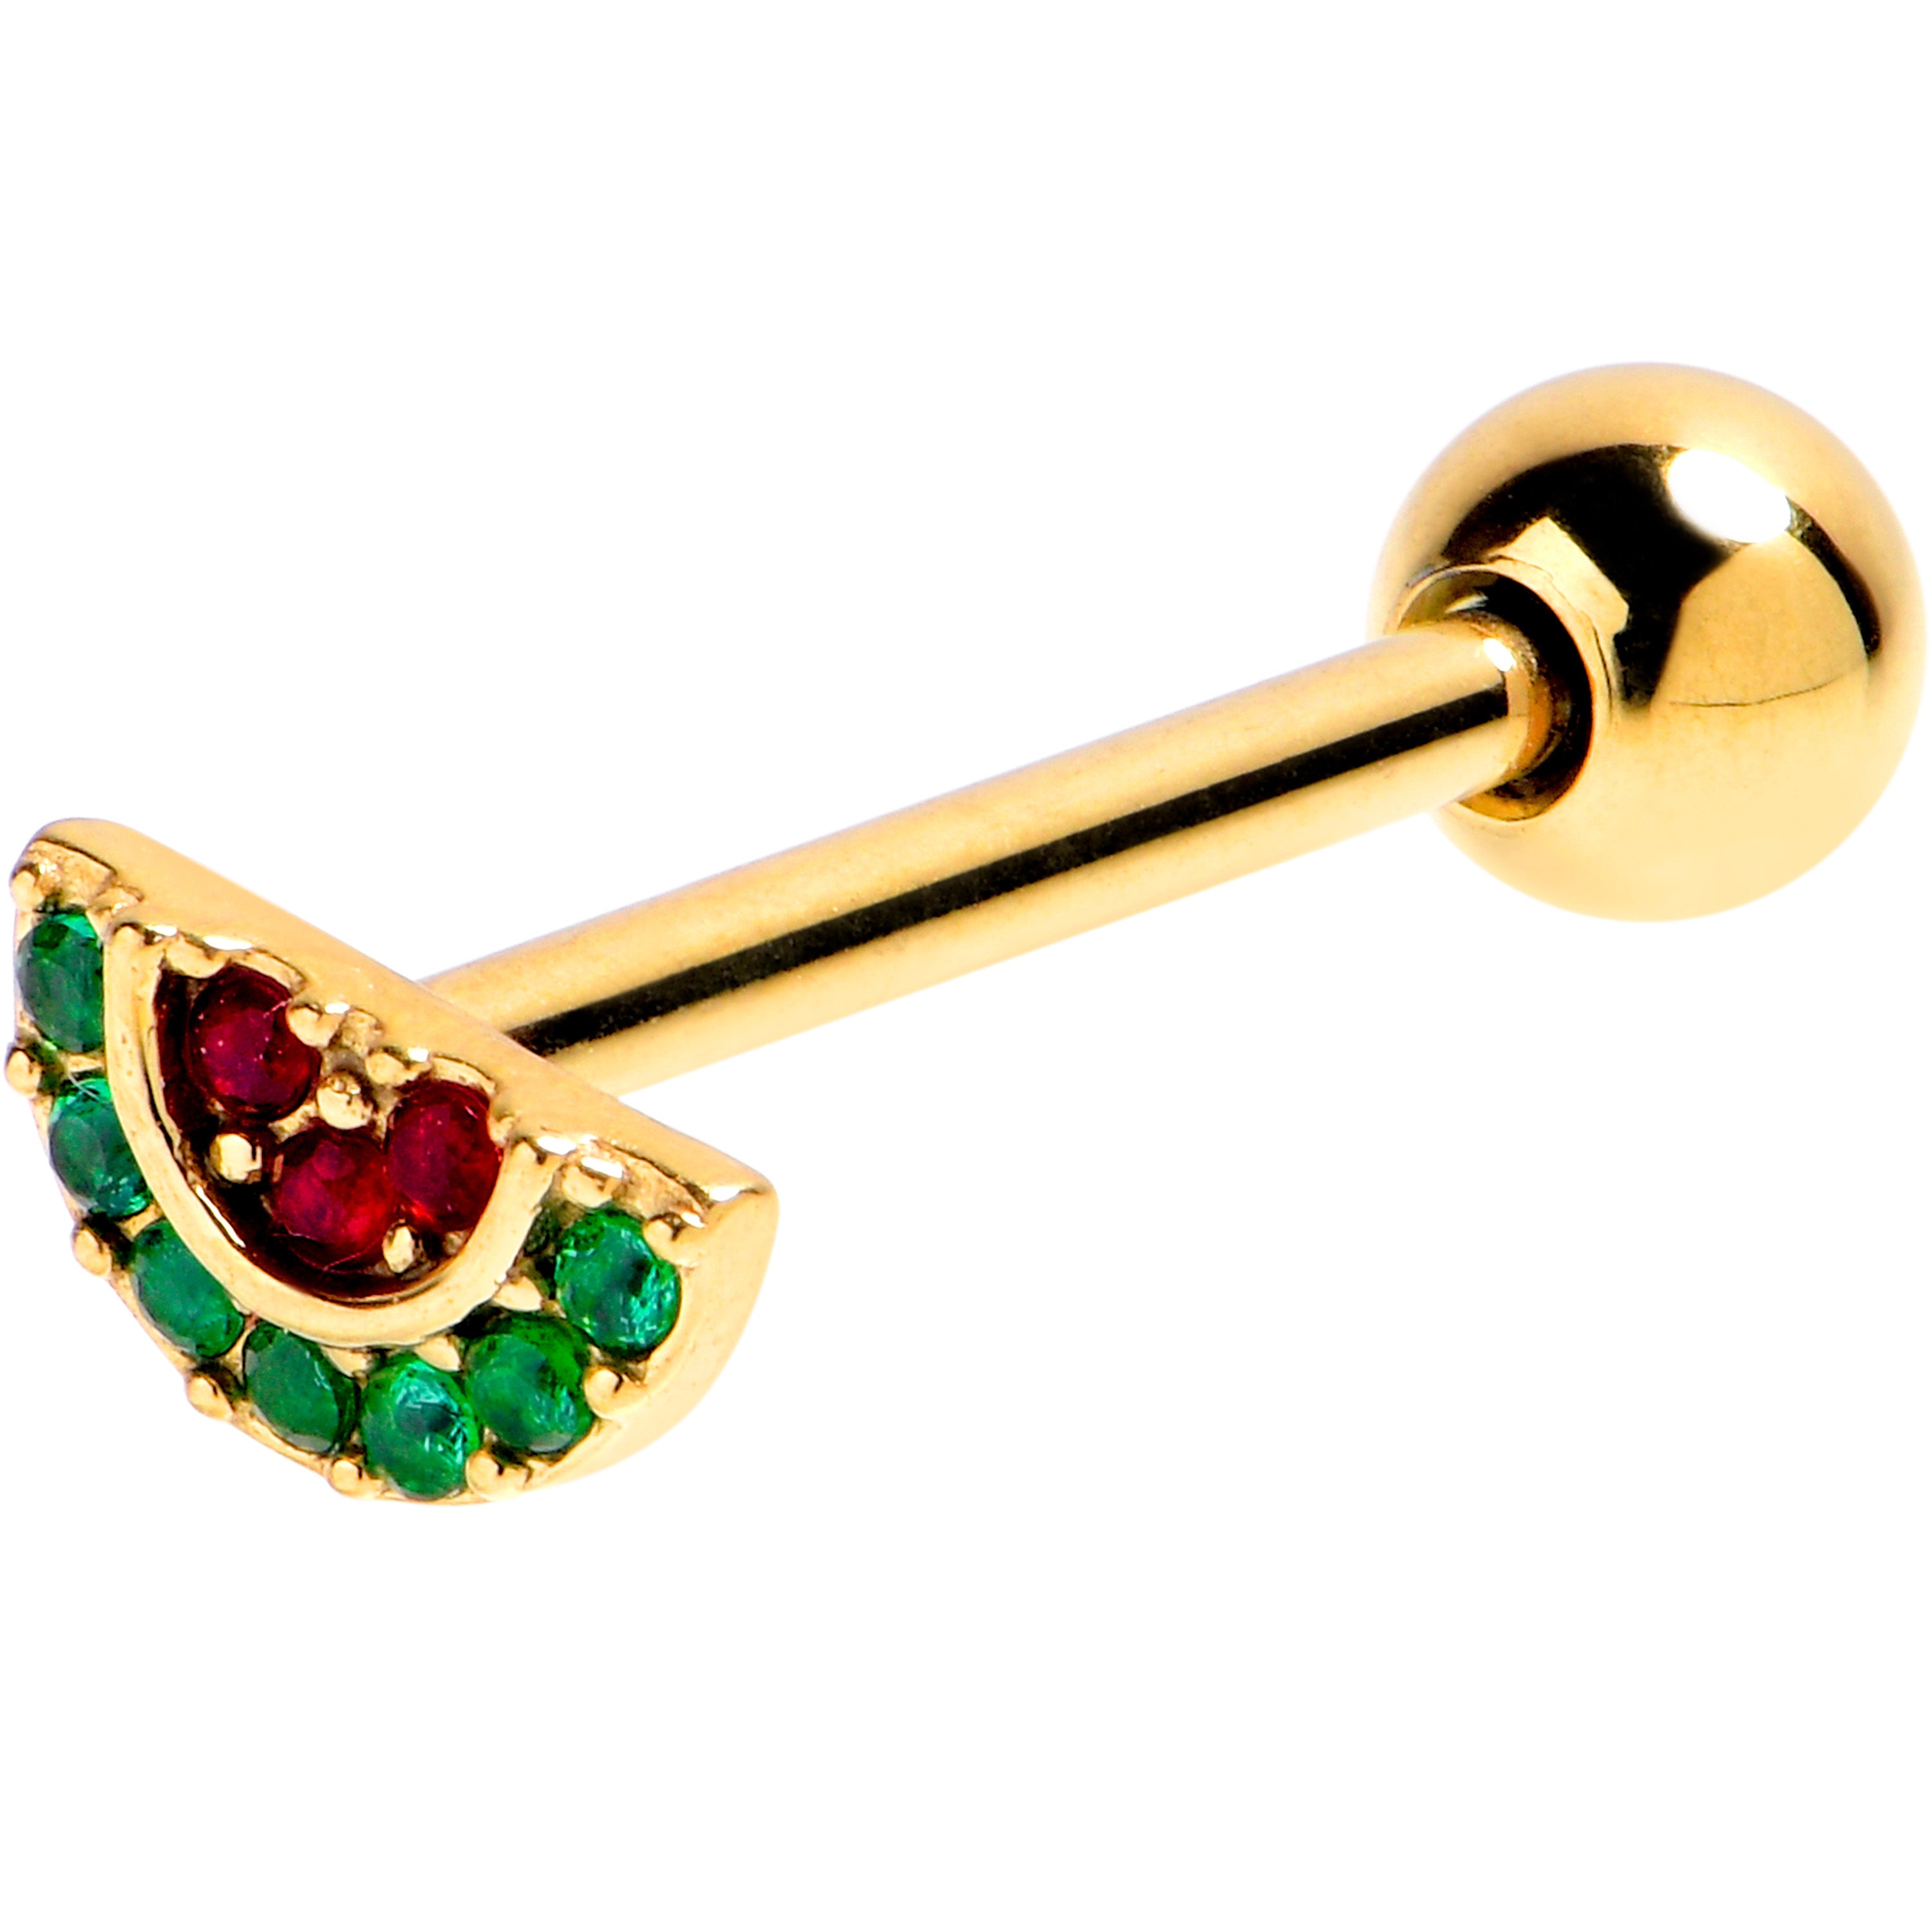 Red Green Gem Gold Tone Yum Watermelon Slice Barbell Tongue Ring